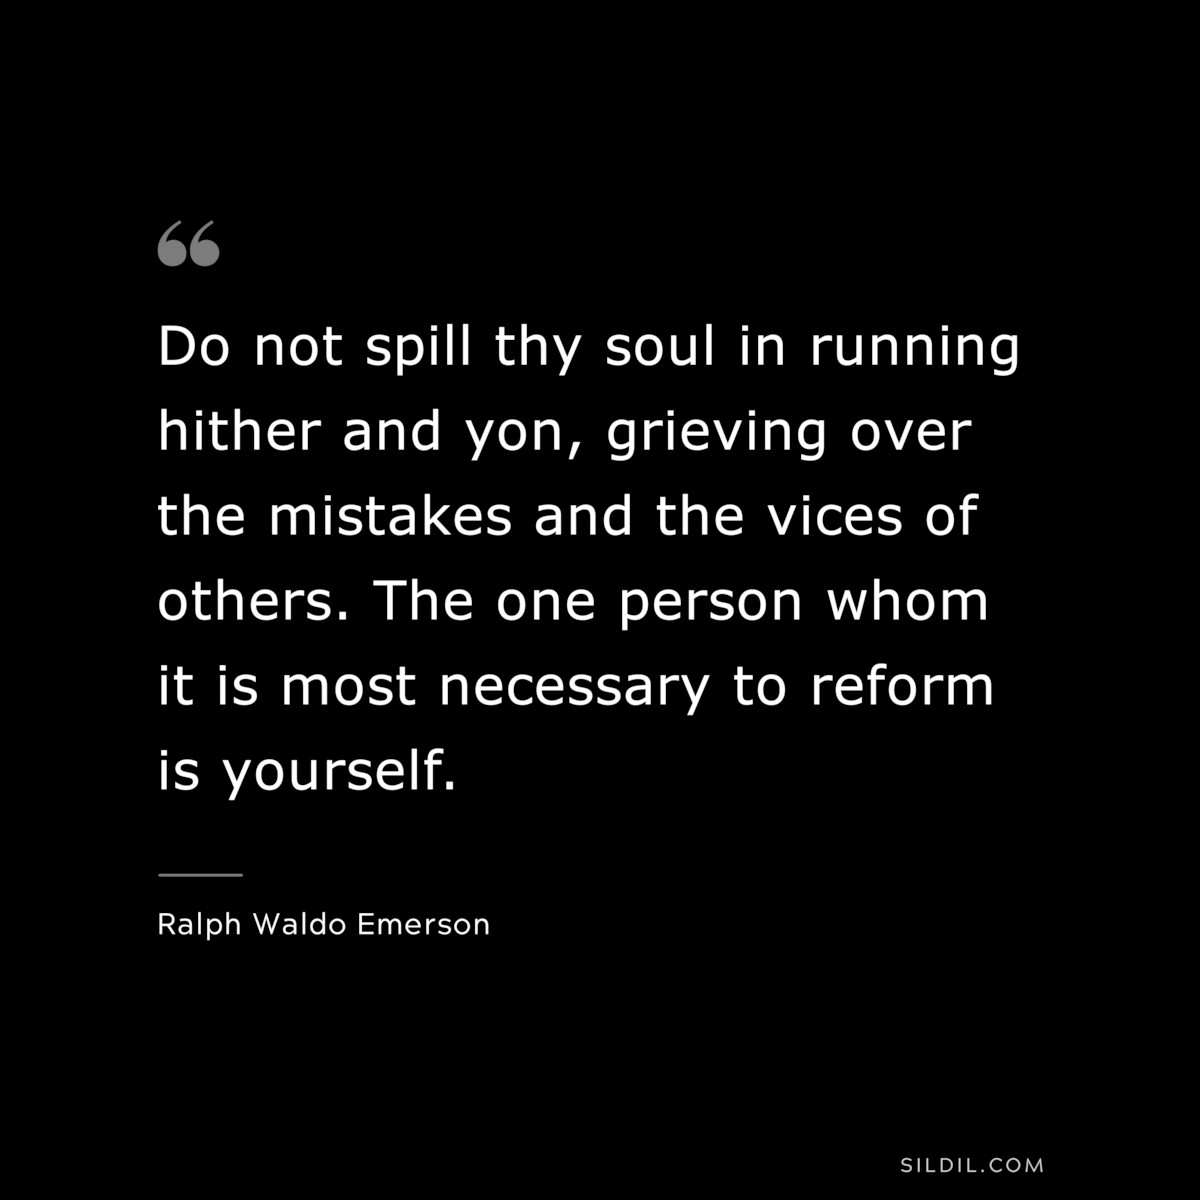 Do not spill thy soul in running hither and yon, grieving over the mistakes and the vices of others. The one person whom it is most necessary to reform is yourself. — Ralph Waldo Emerson